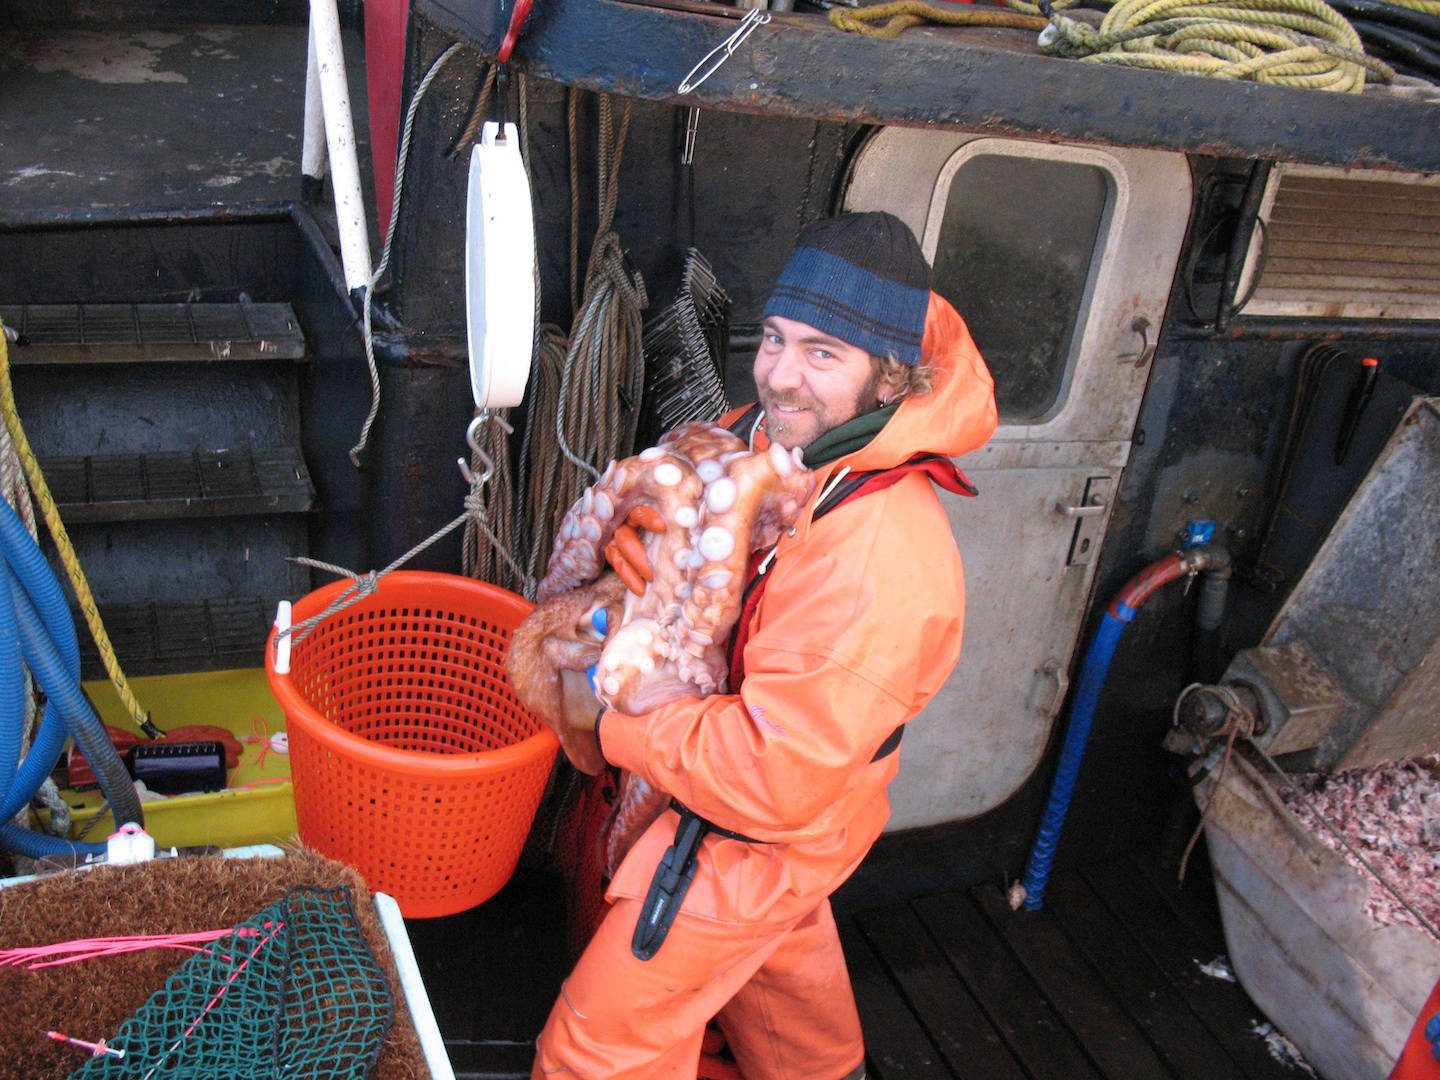 Dr. Reid Brewer holds a Pacific giant octopus while doing field research in 2009. Brewer was named Campus Director of Kachemak Bay Campus, Kenai Peninsula College, on Oct. 19. (Photo provided)